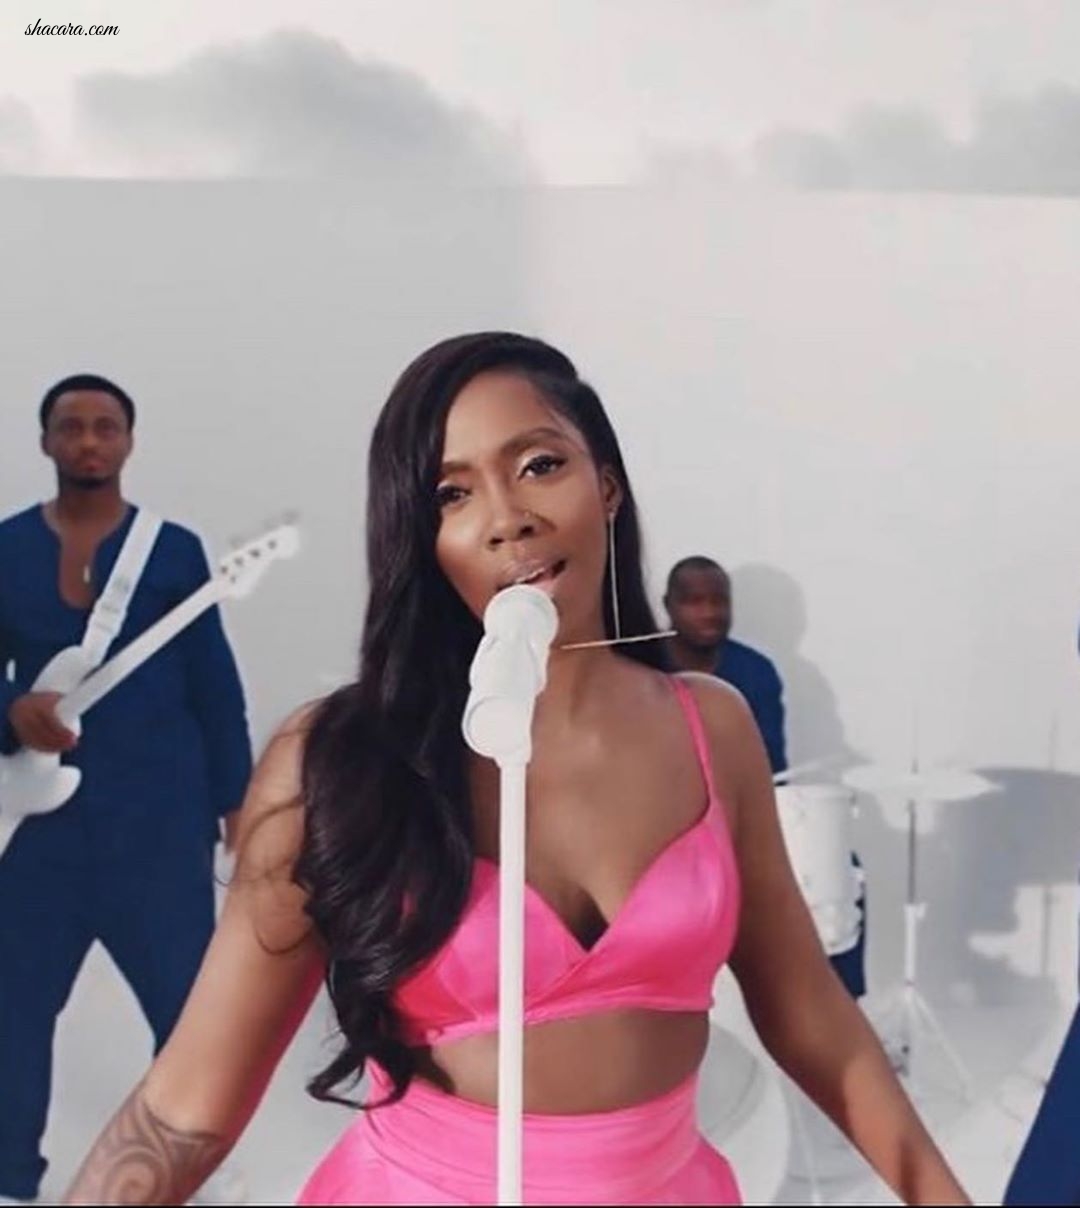 Tiwa Savage Teases Jaw-Dropping Looks From Her Upcoming “CELIA” Album